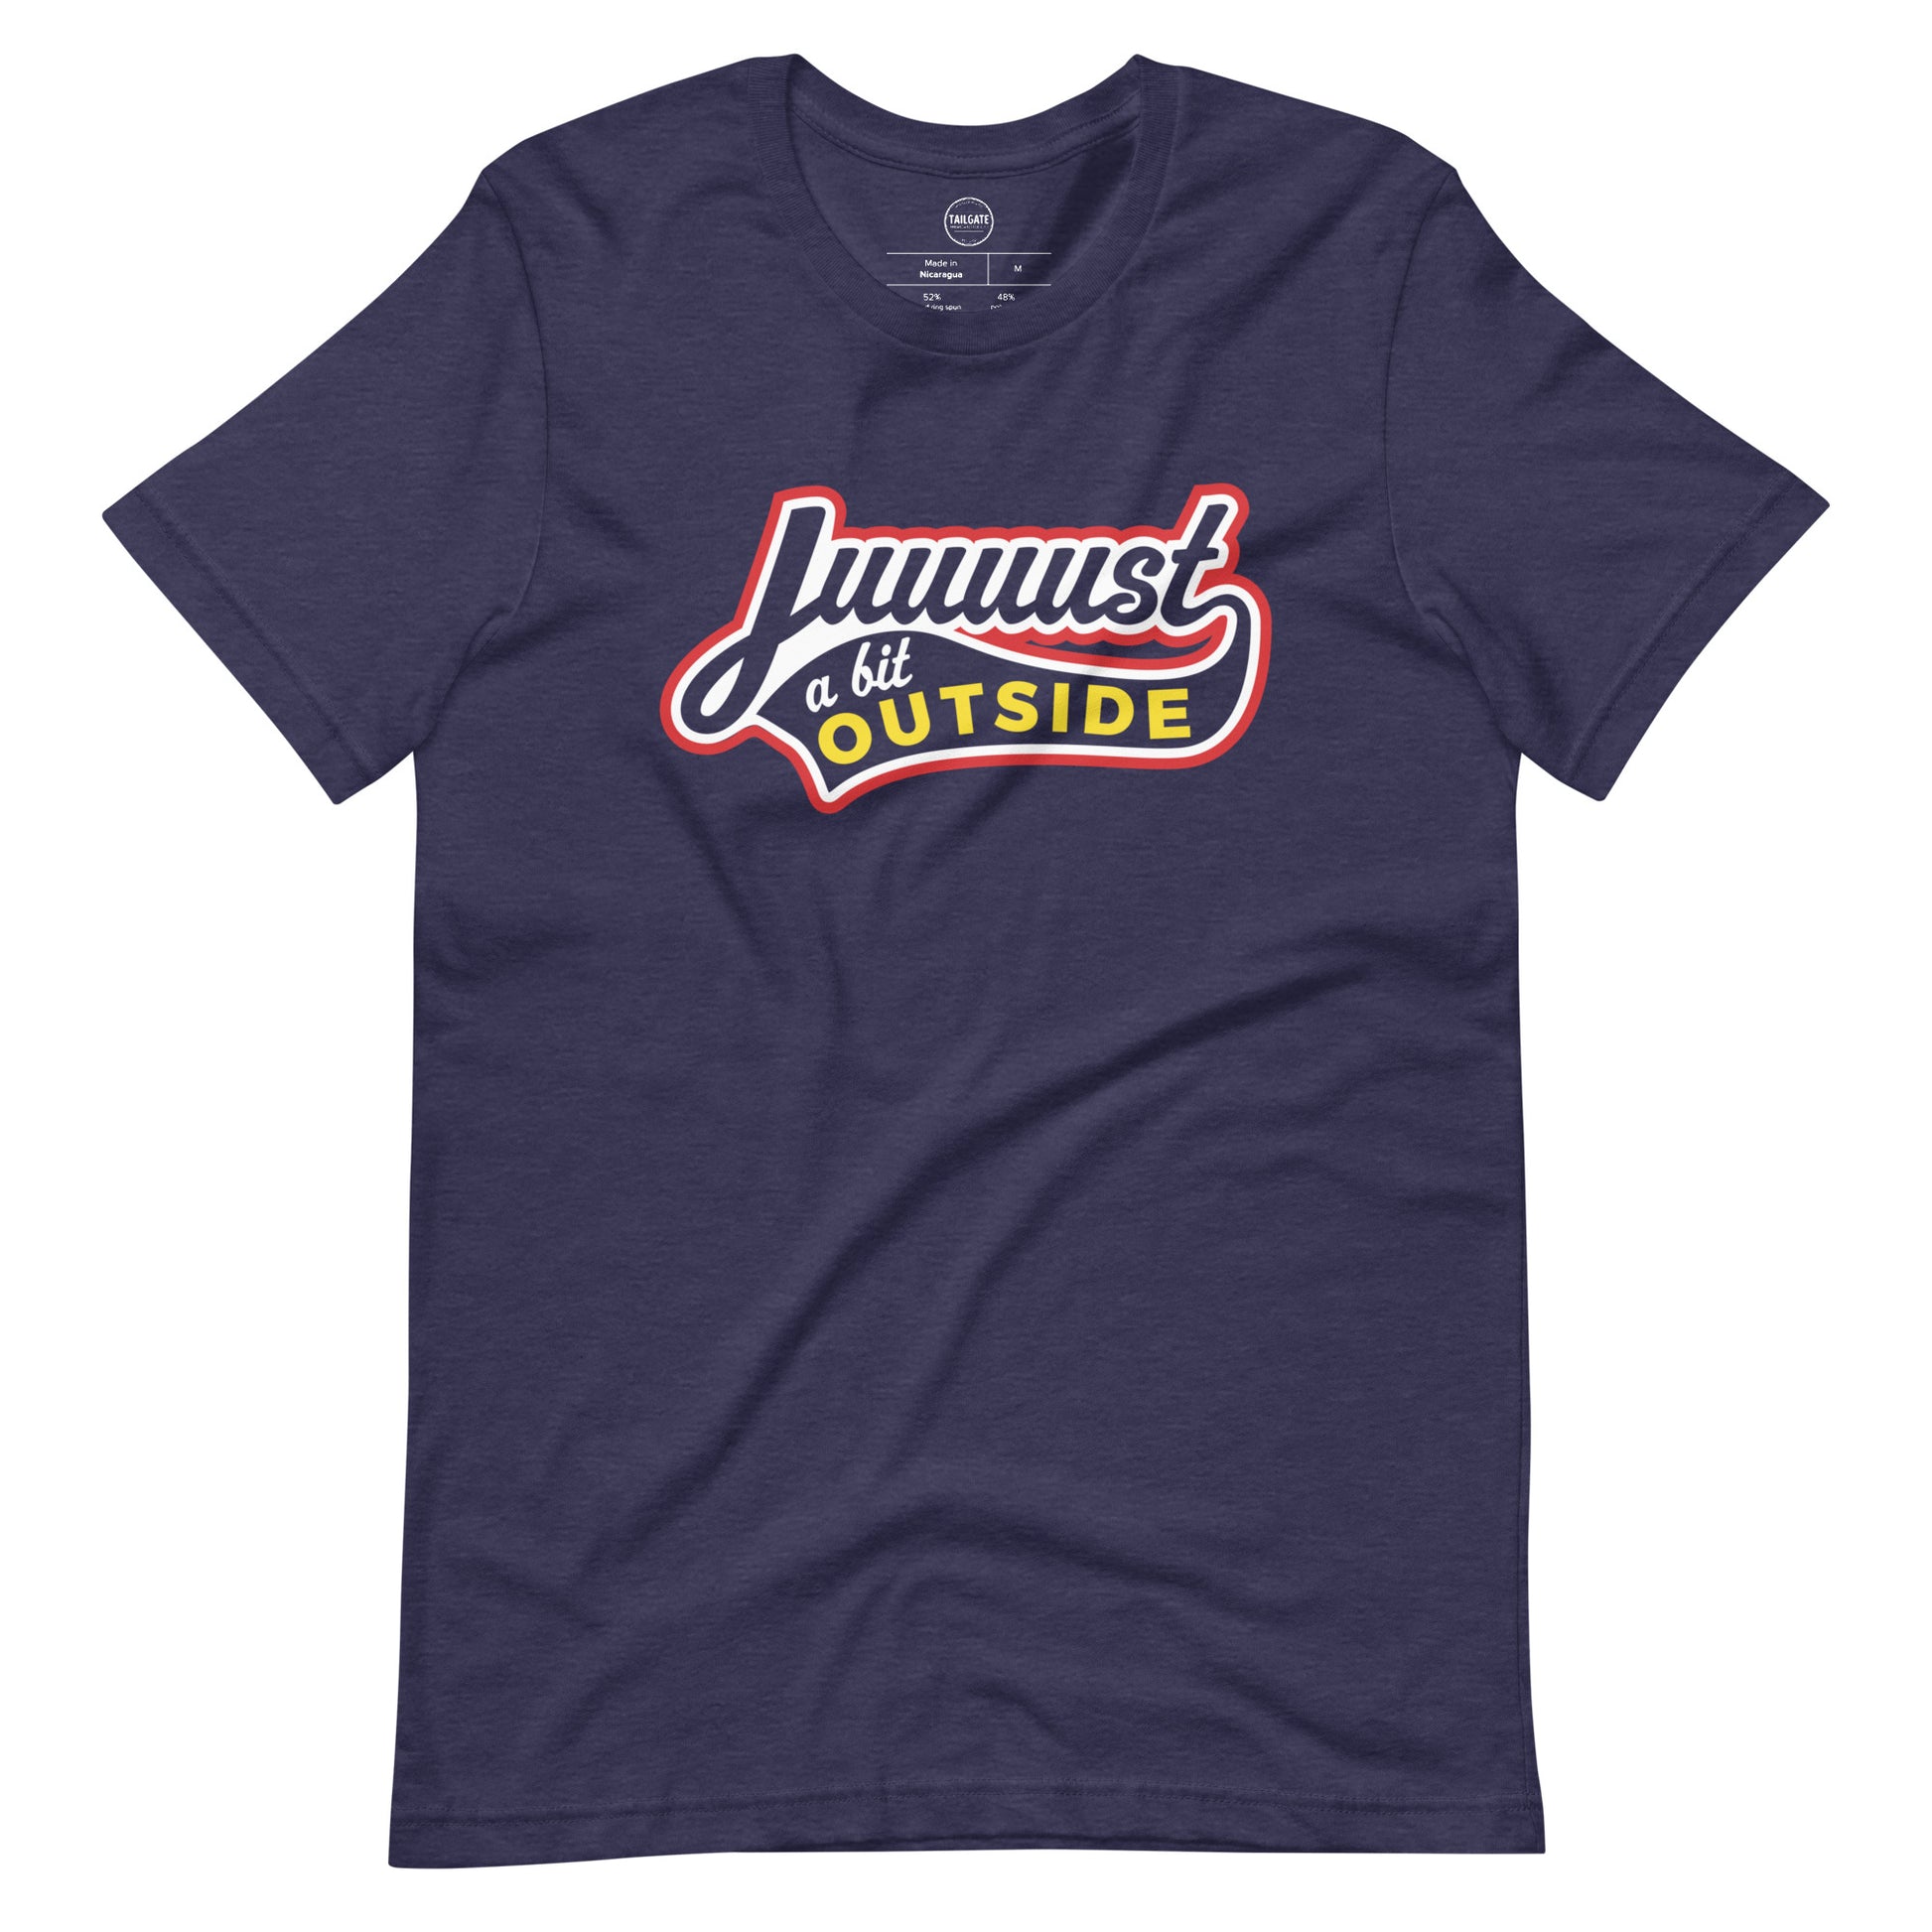 Image of heather navy t-shirt with design of "Juuuust a bit Outside" in white/red/yellow located on centre chest. Just a Bit Outside is an homage to the great baseball movie "Major League". This design is exclusive to Tailgate Mercantile and available only online.